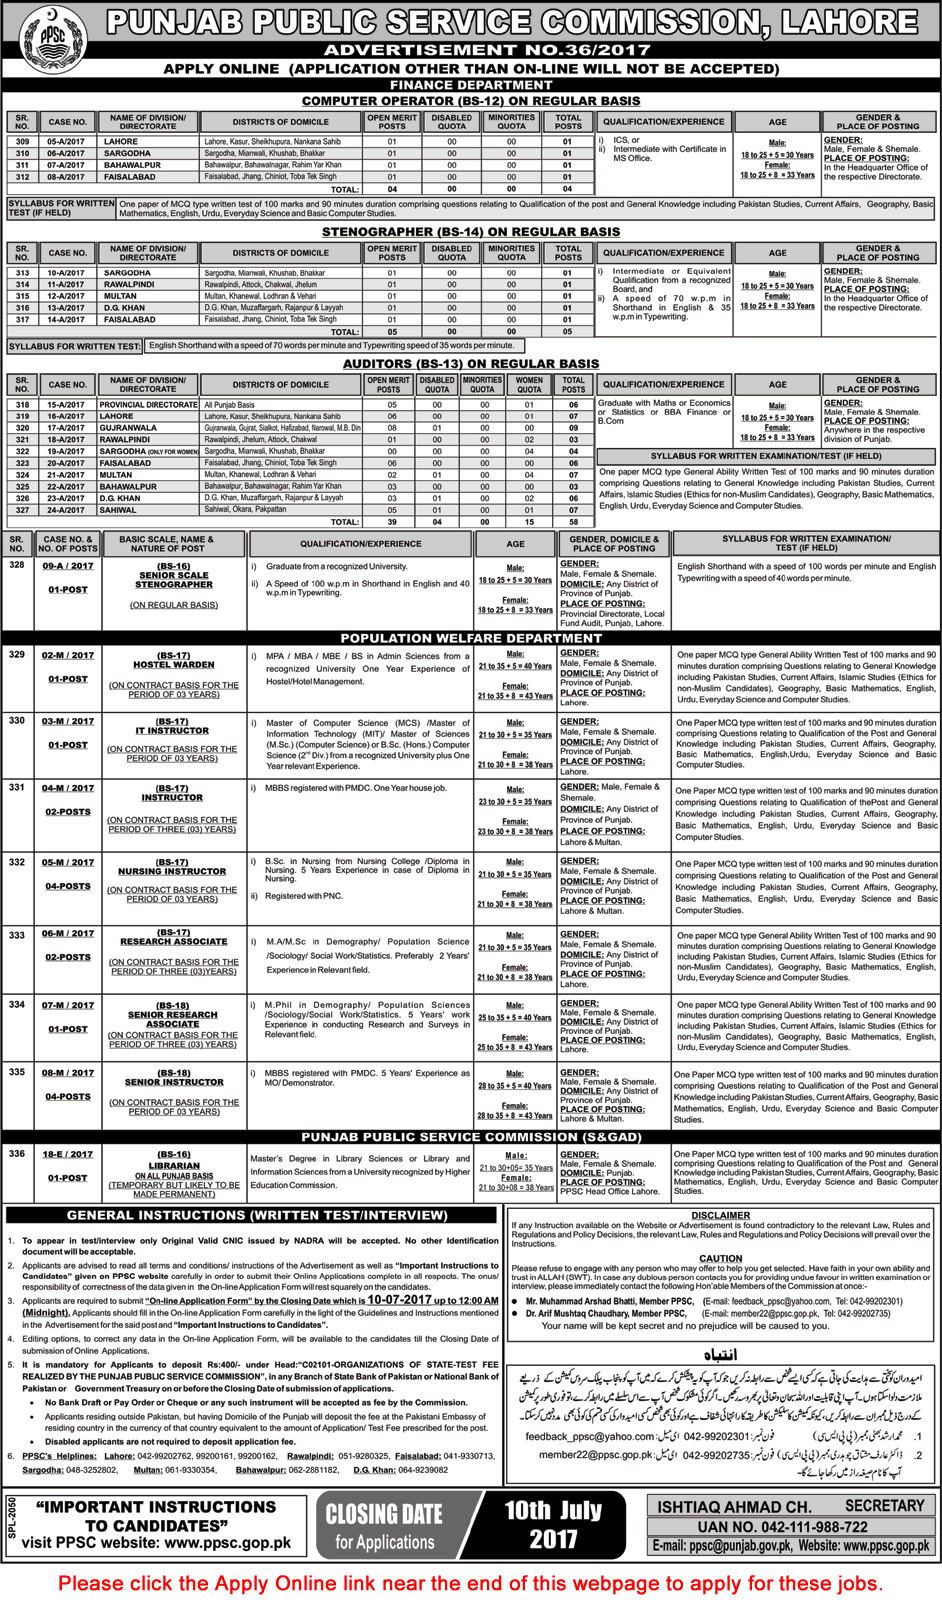 PPSC Jobs June 2017 Apply Online Consolidated Advertisement No 36/2017 Latest